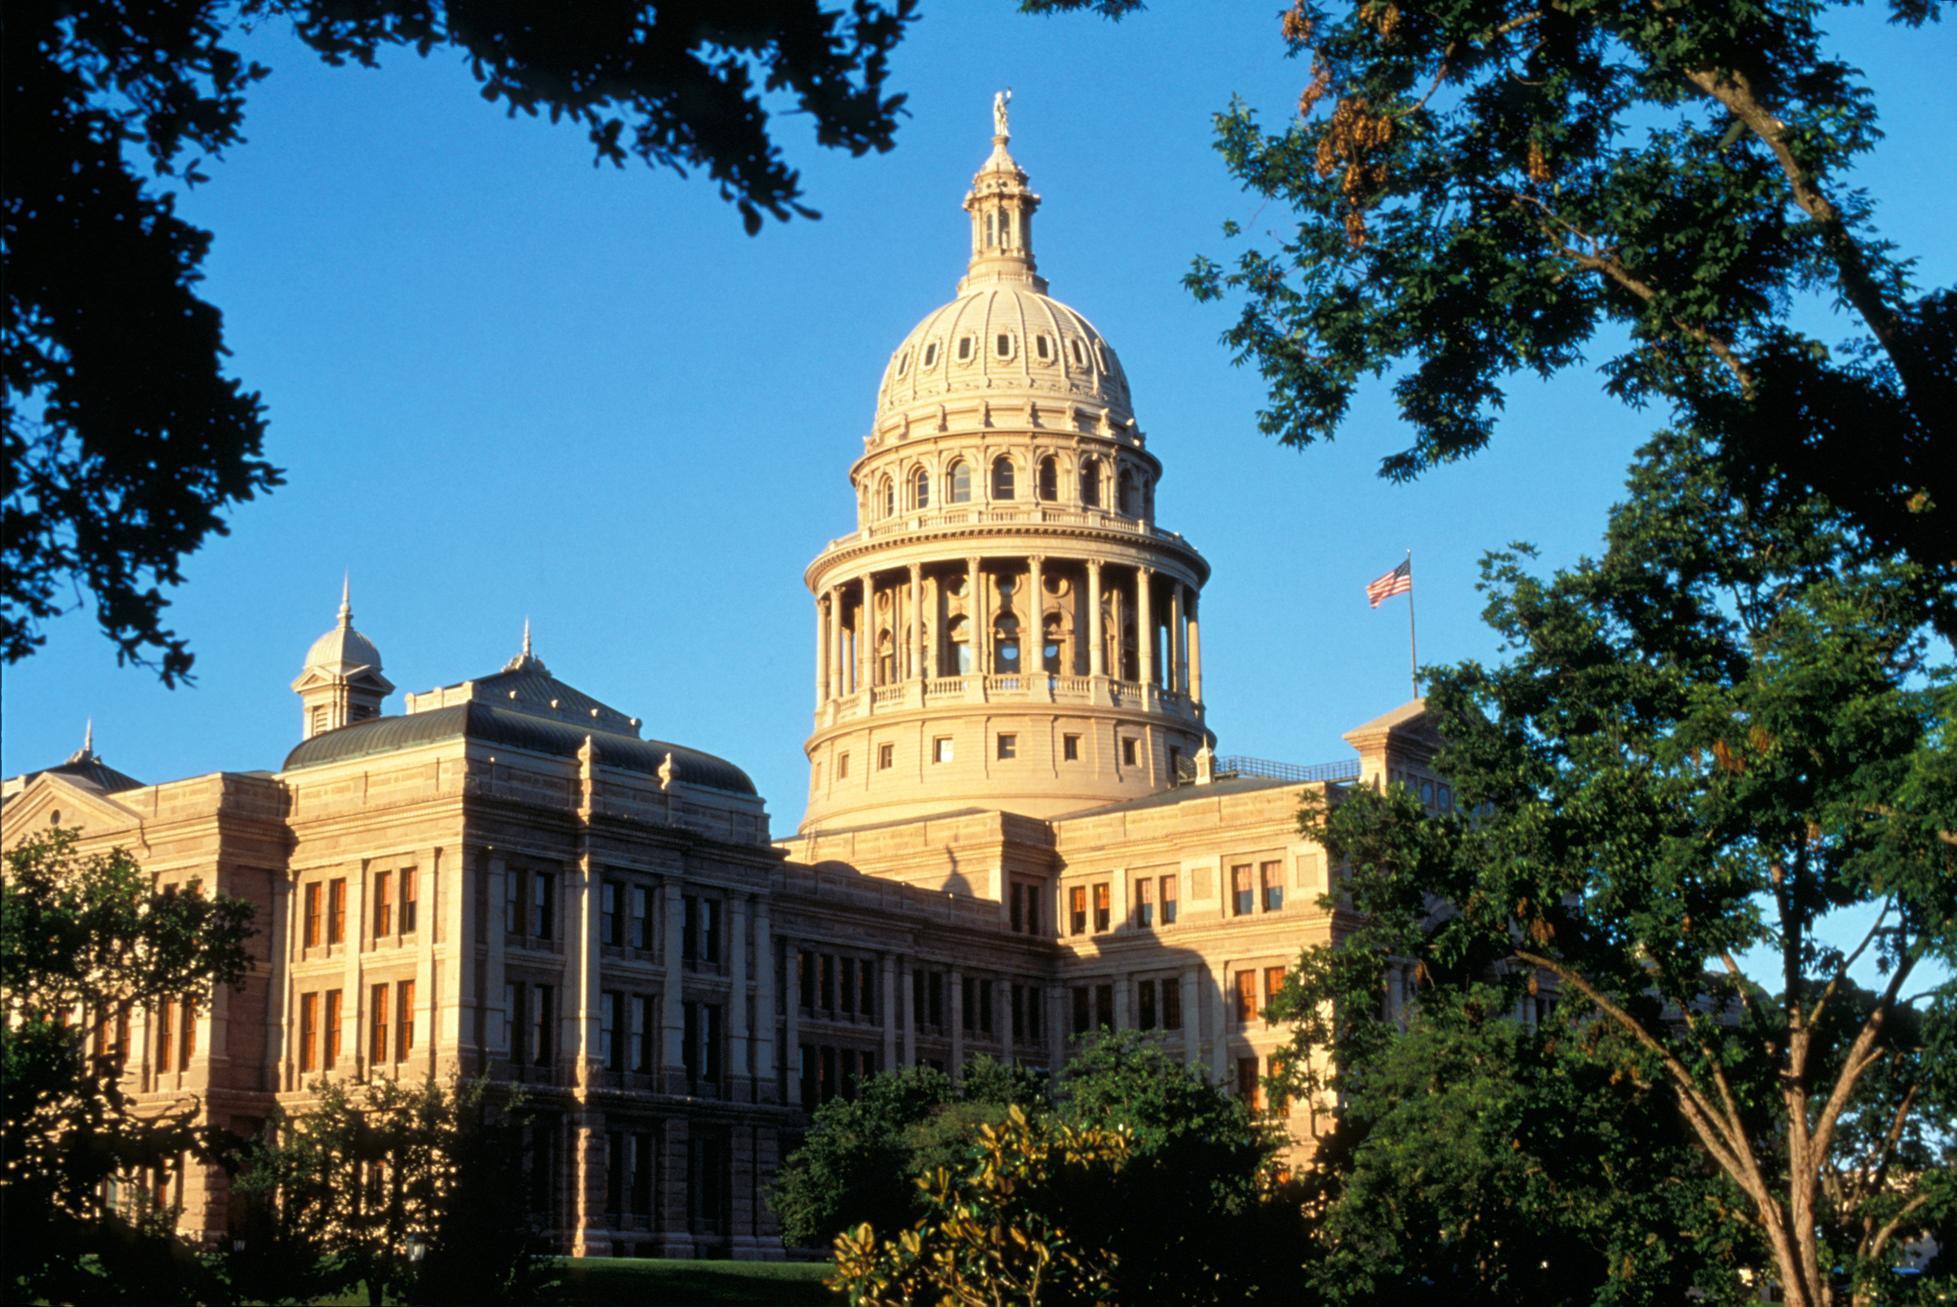 The Texas State Capitol building was built from red granite (Austin Conv. and Visitors Bureau)